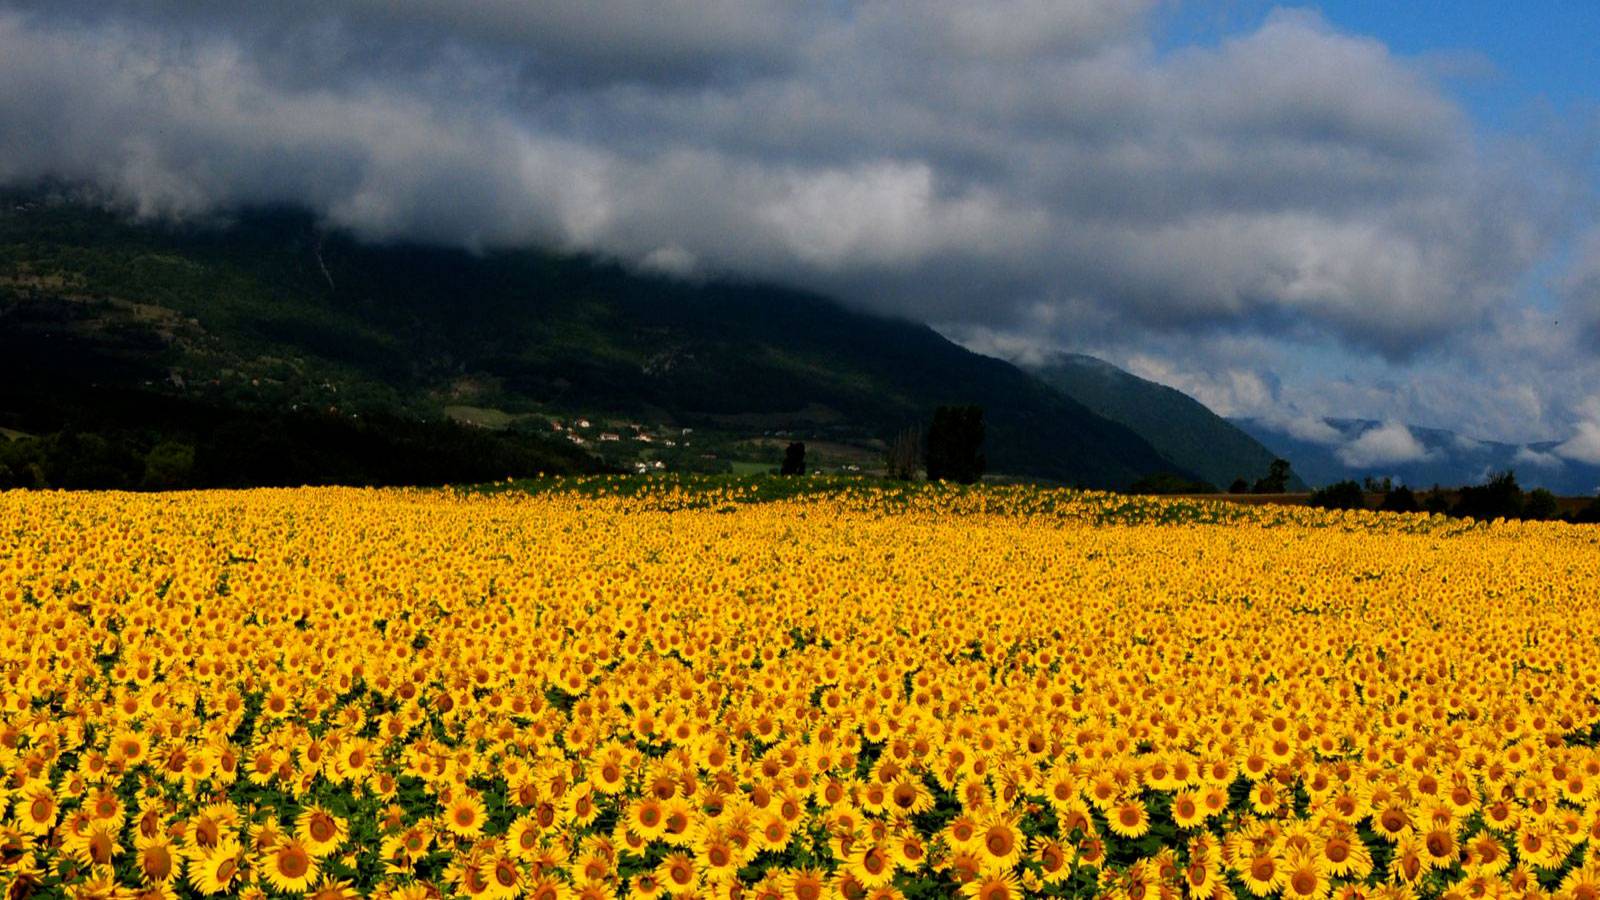 Field of yellow flowers with mountains in background